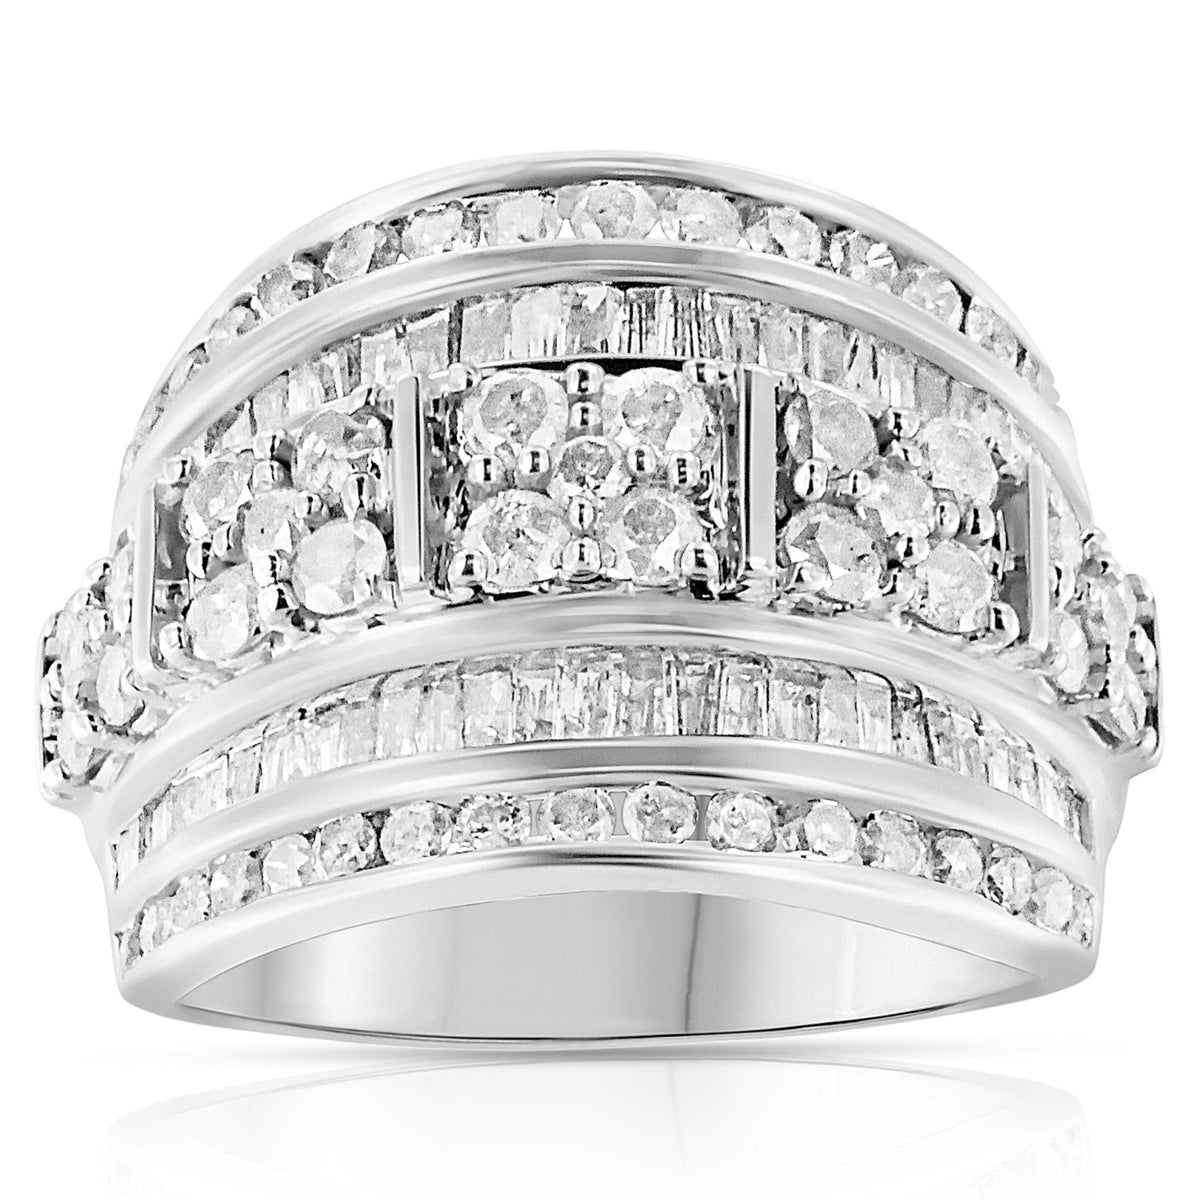 .925 Sterling Silver 2.0 Cttw Round &amp; Baguette Cut Diamond Multi-Row Channel Set Tapered Cocktail Fashion Ring (I-J Color, I3 Clarity) - Size 7 - LinkagejewelrydesignLinkagejewelrydesign